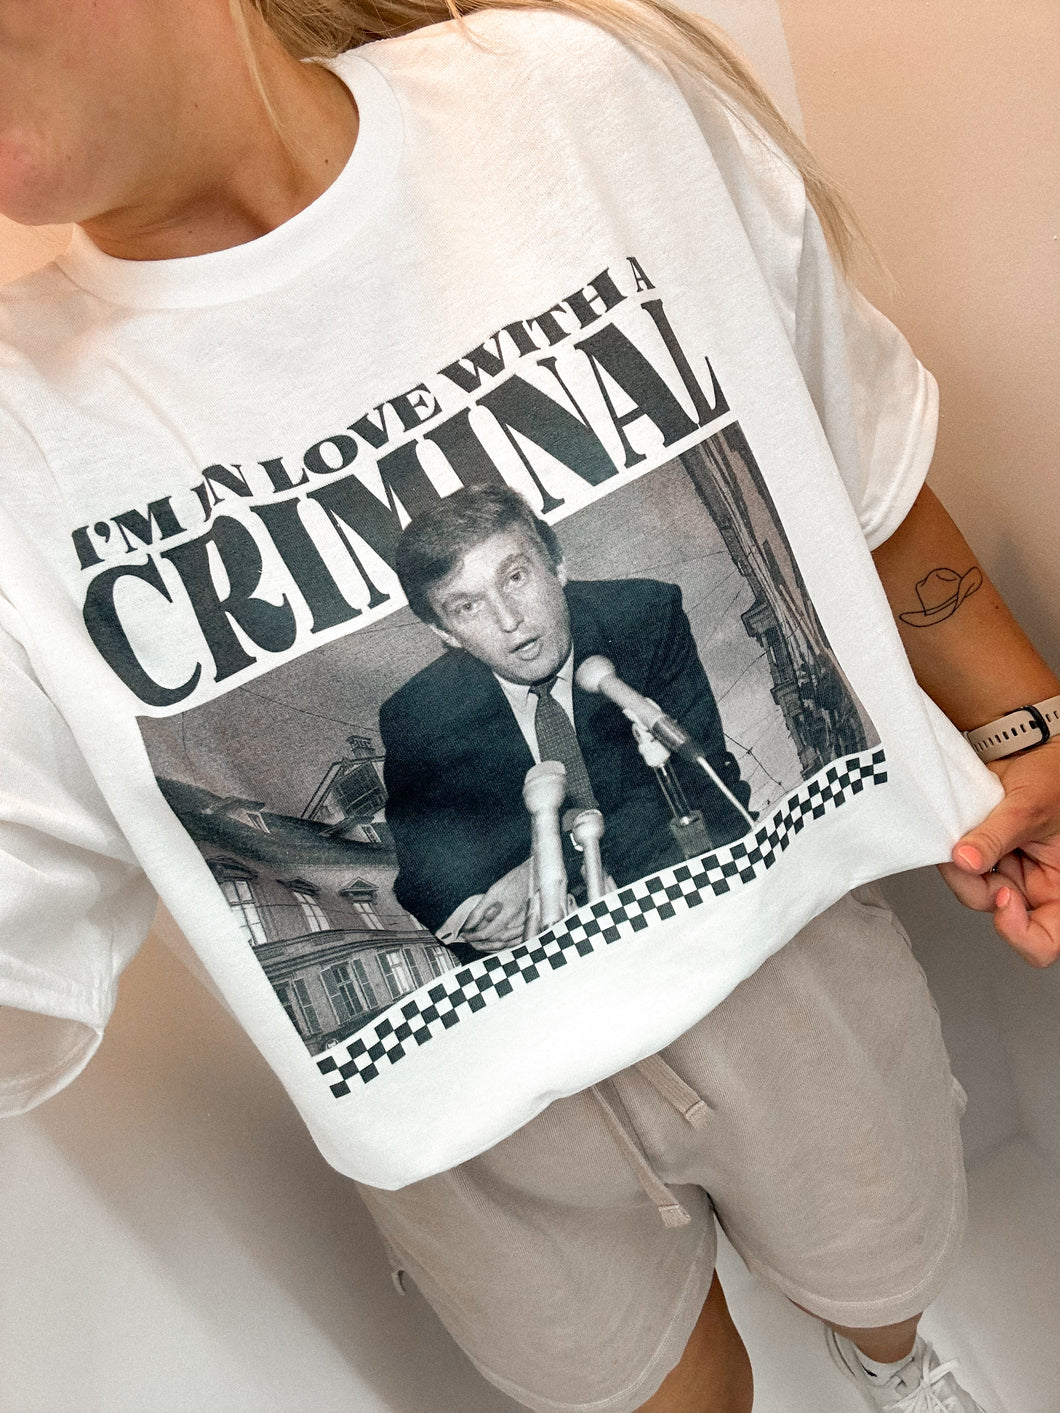 IN LOVE WITH A CRIMINAL